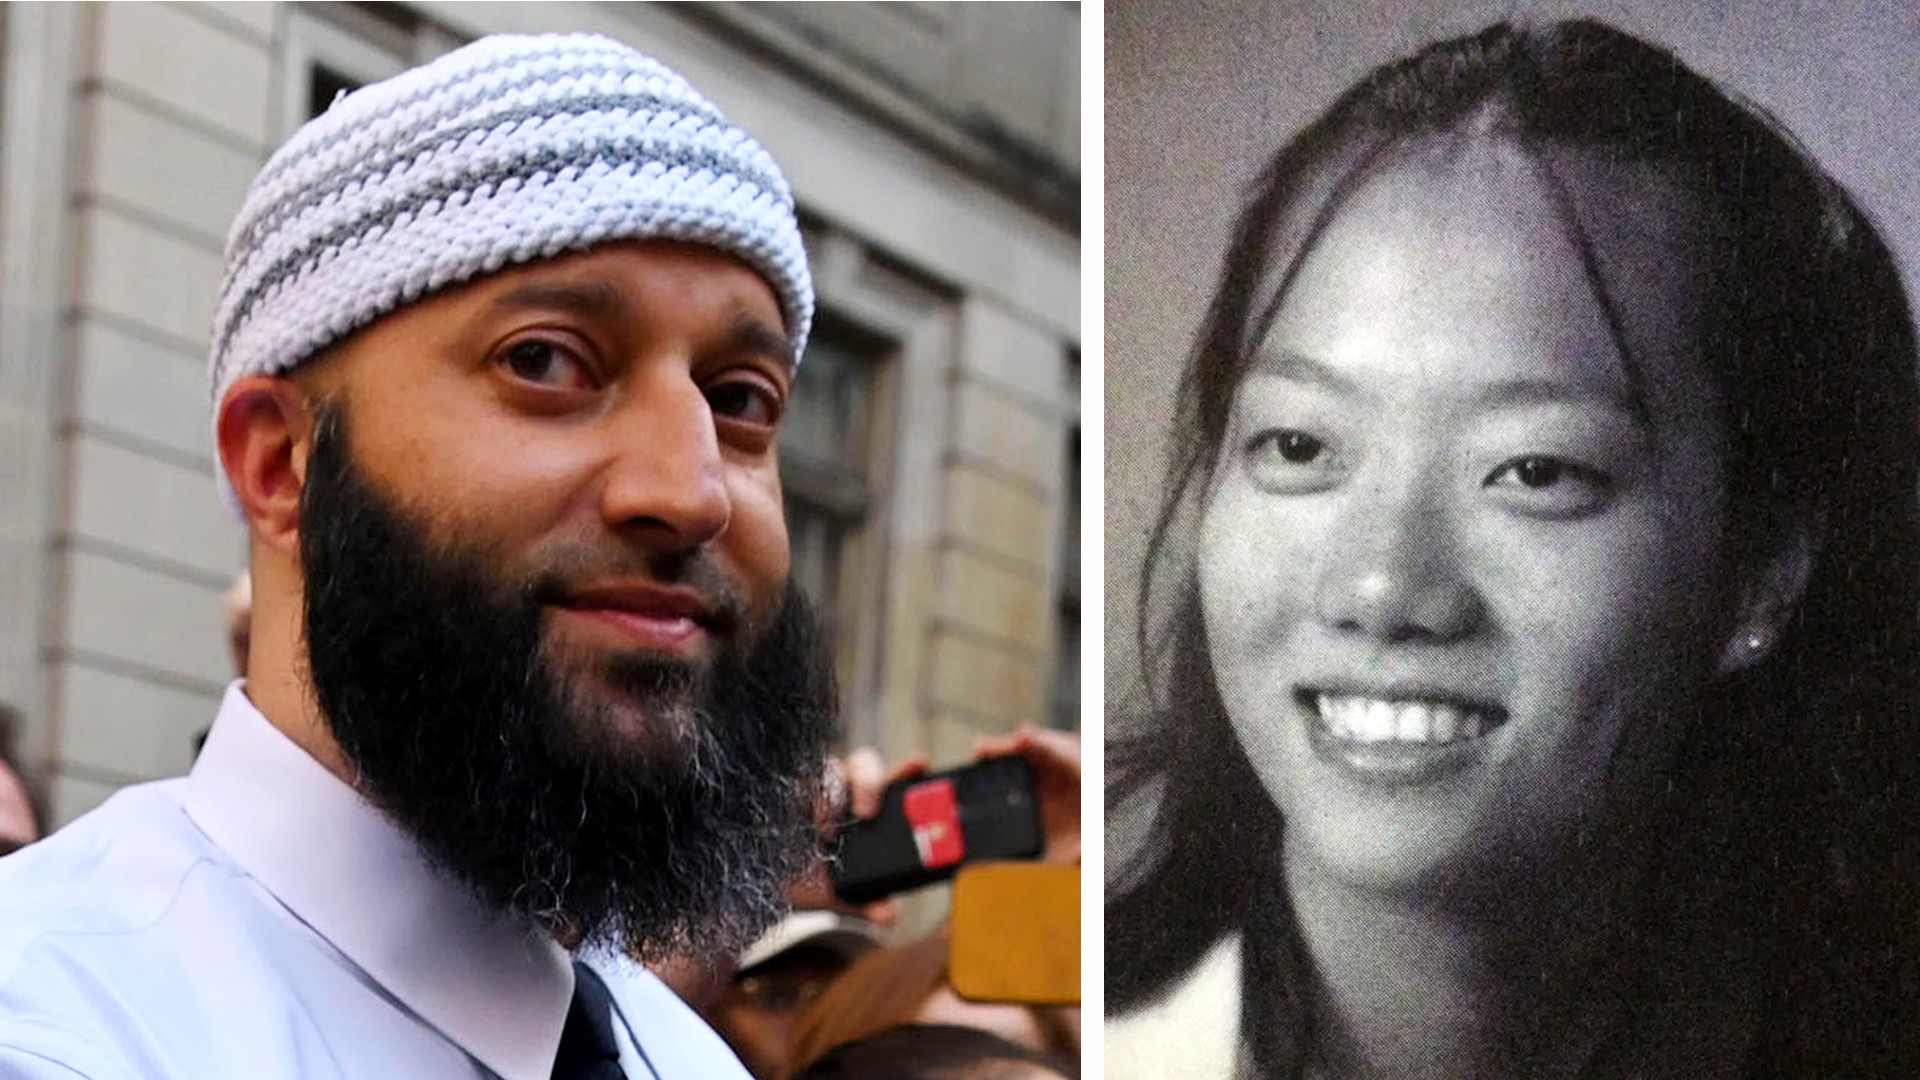 Adnan Syed case: Family of Hae Min Lee plans to appeal tossed murder  conviction – KIRO 7 News Seattle